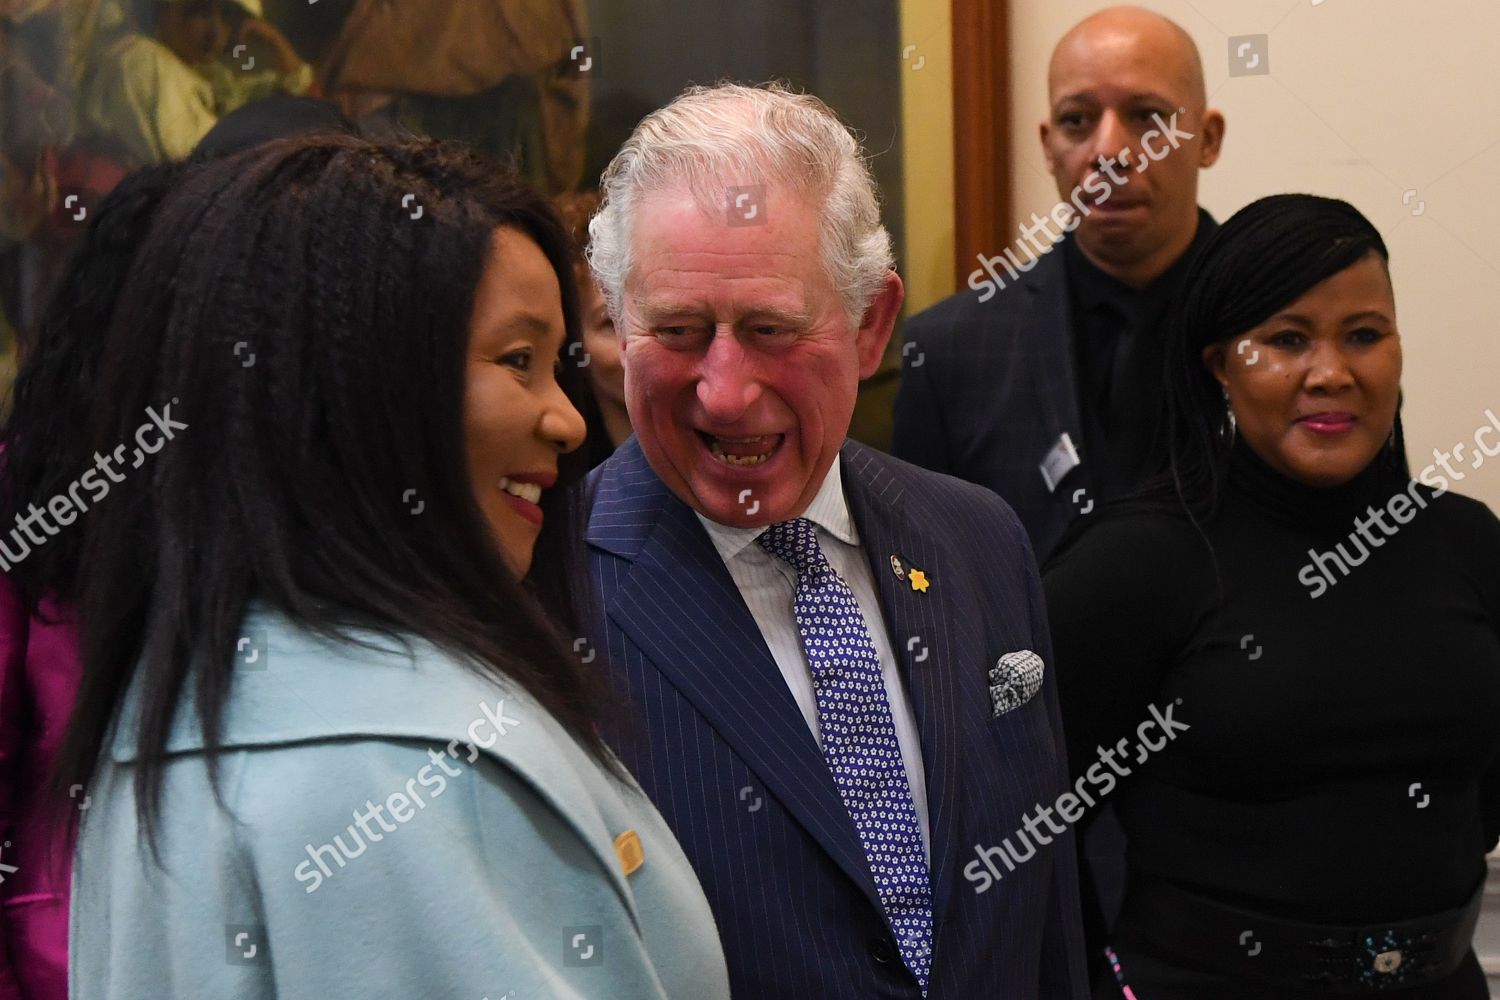 prince-charles-and-duchess-of-cornwall-visit-liverpool-uk-shutterstock-editorial-10102968a.jpg